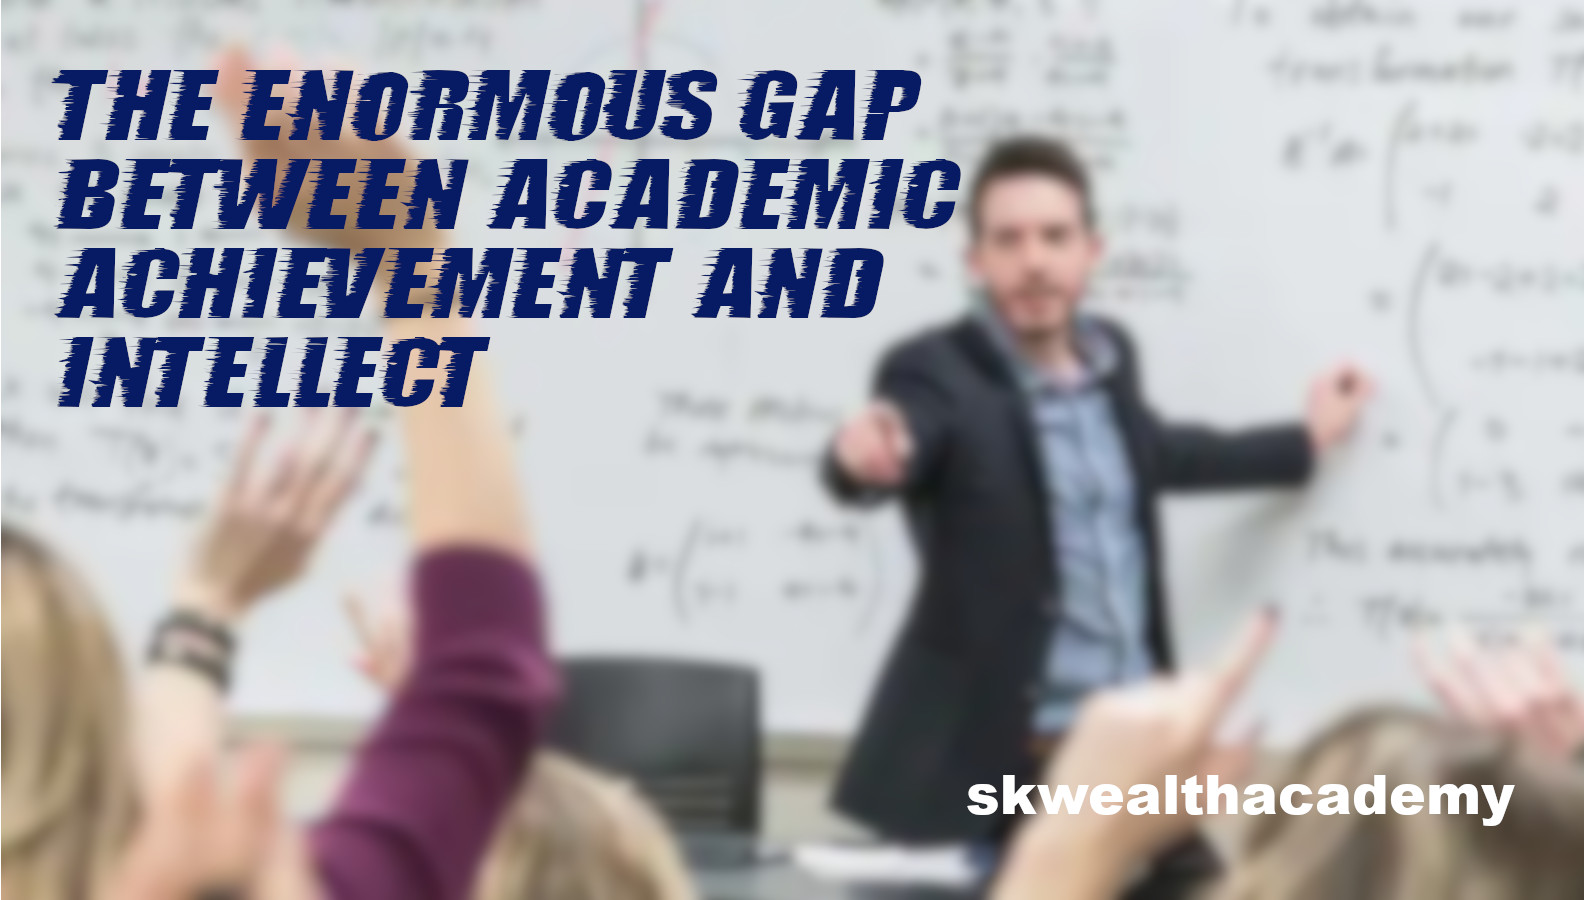 the enormous gap between academic achievement and intellect